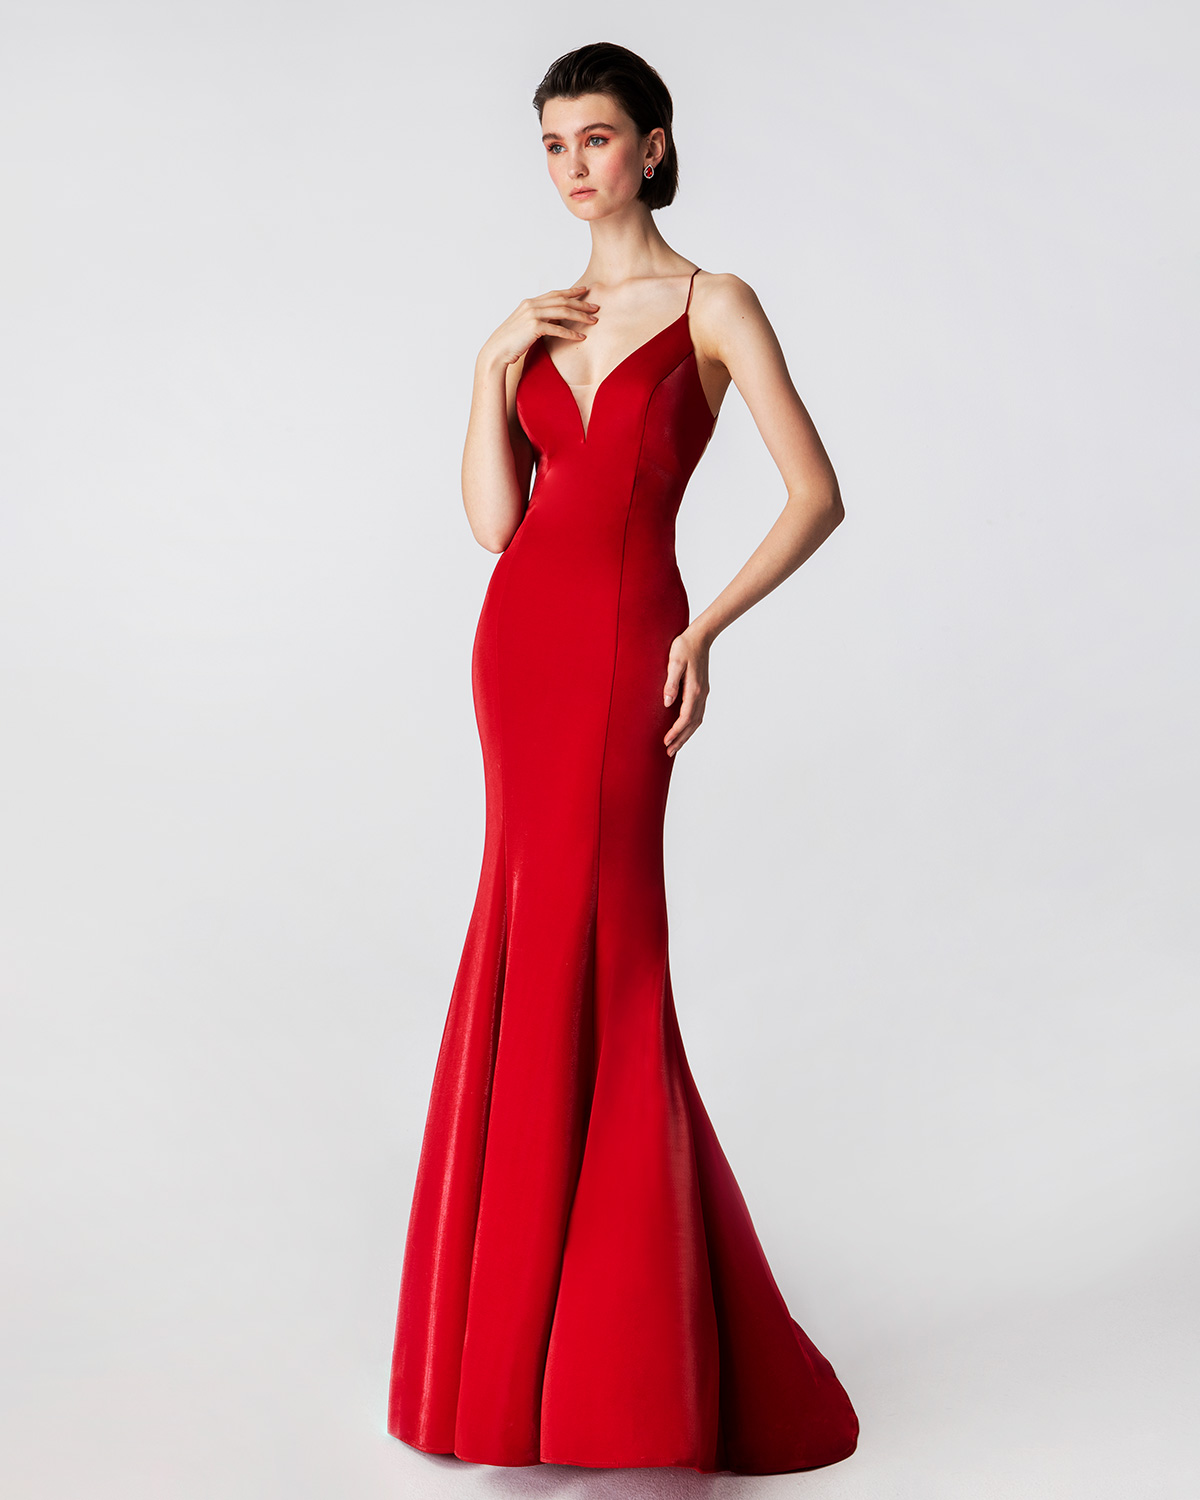 Cocktail Dresses / Long evening dress with shining fabric and open back